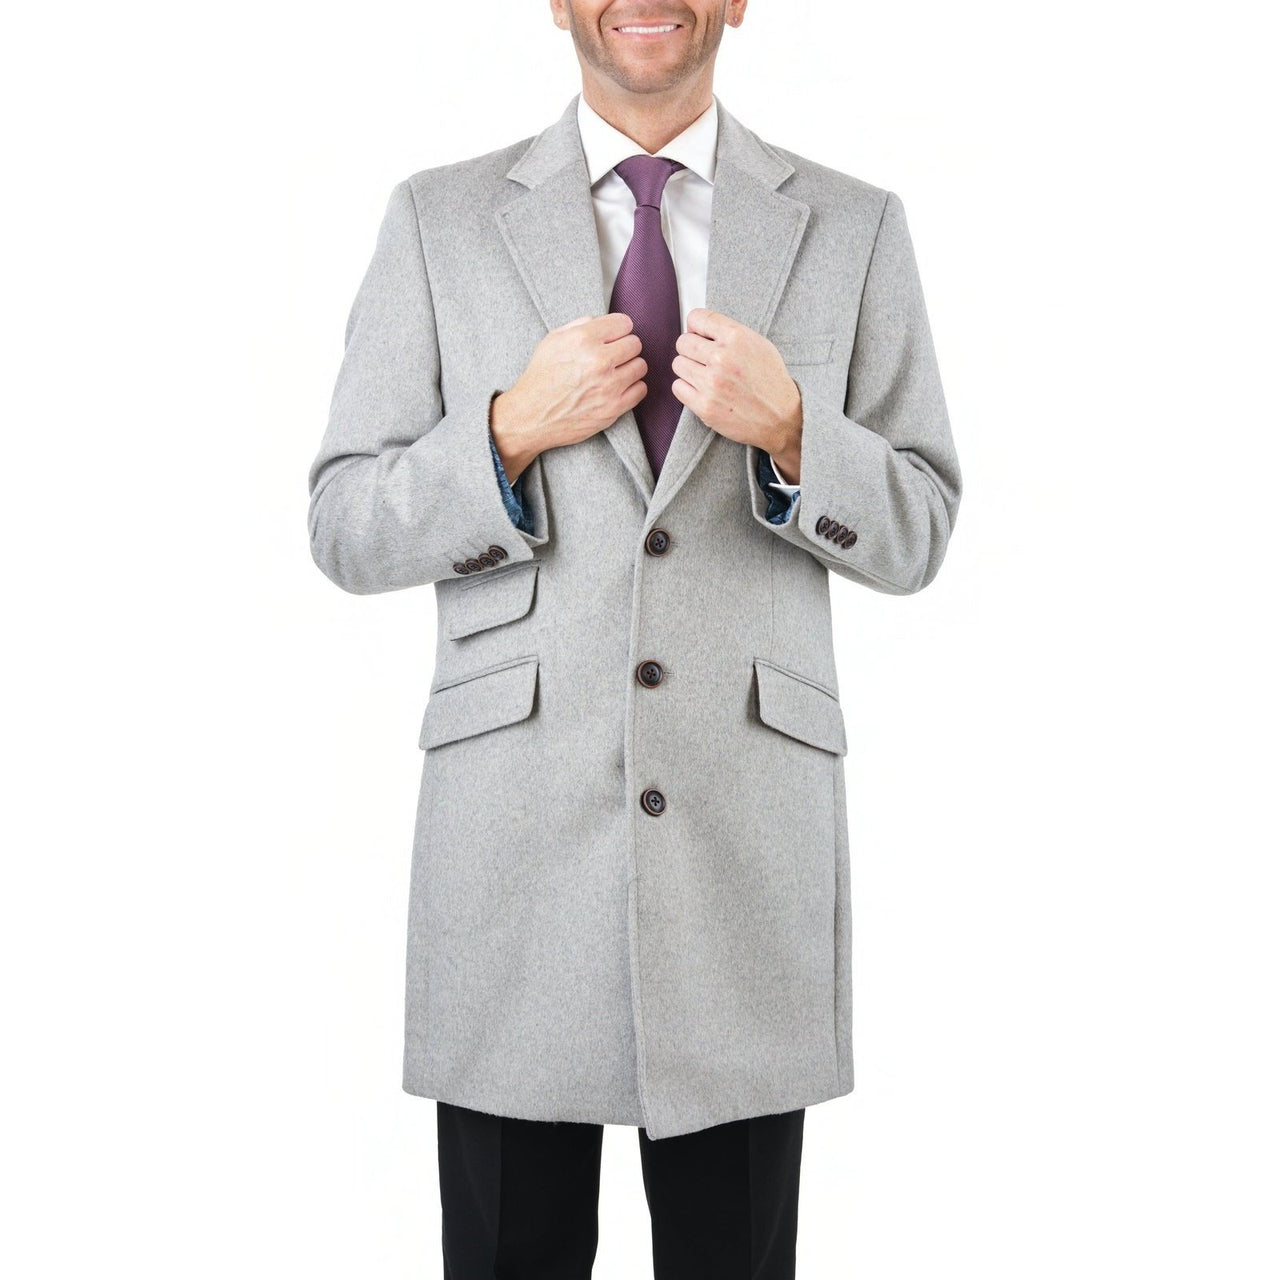 Arthur Black OUTERWEAR The Suit Depot Men's Wool Cashmere Single Breasted Light Gray 3/4 Length Top Coat